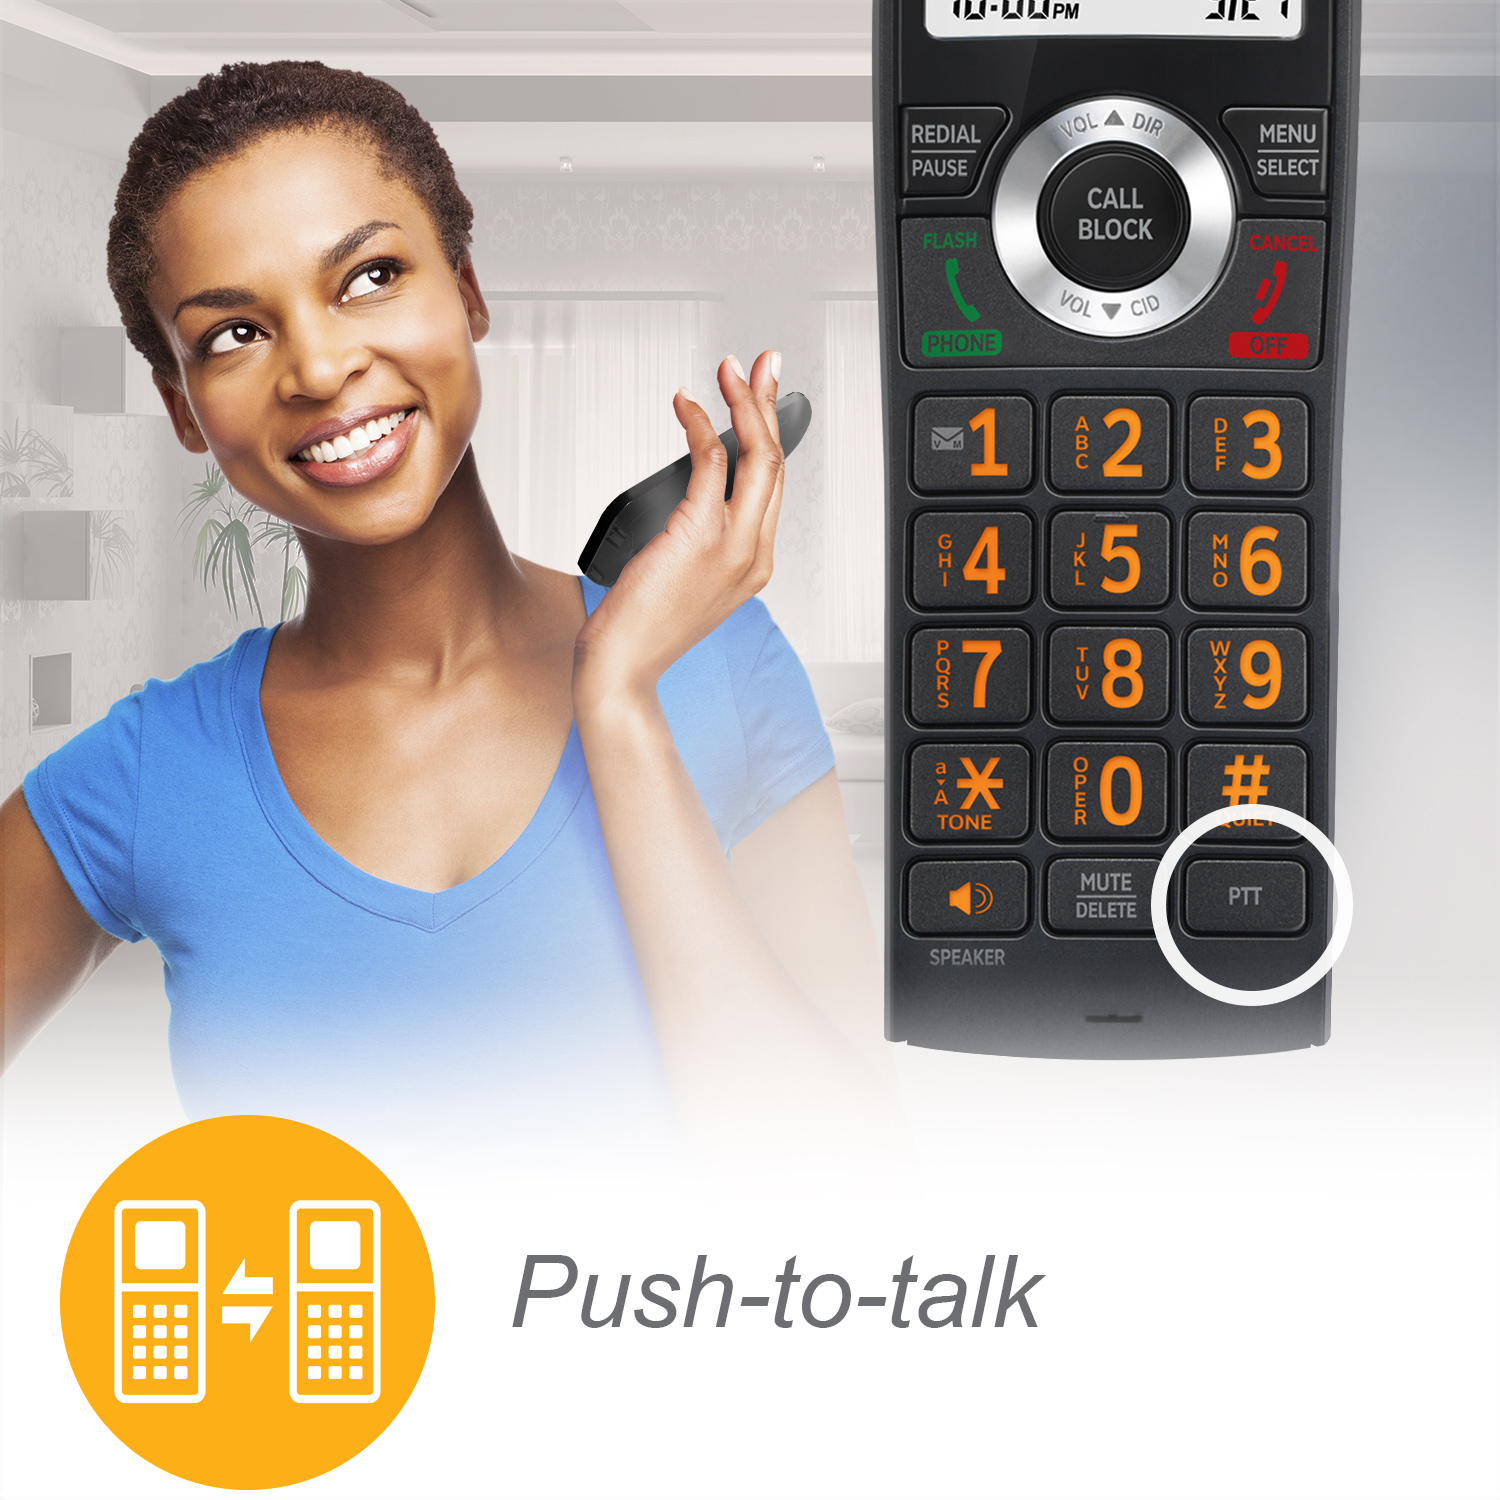 5-Handset Expandable Cordless Phone with Unsurpassed Range, Smart Call Blocker and Answering System - view 8